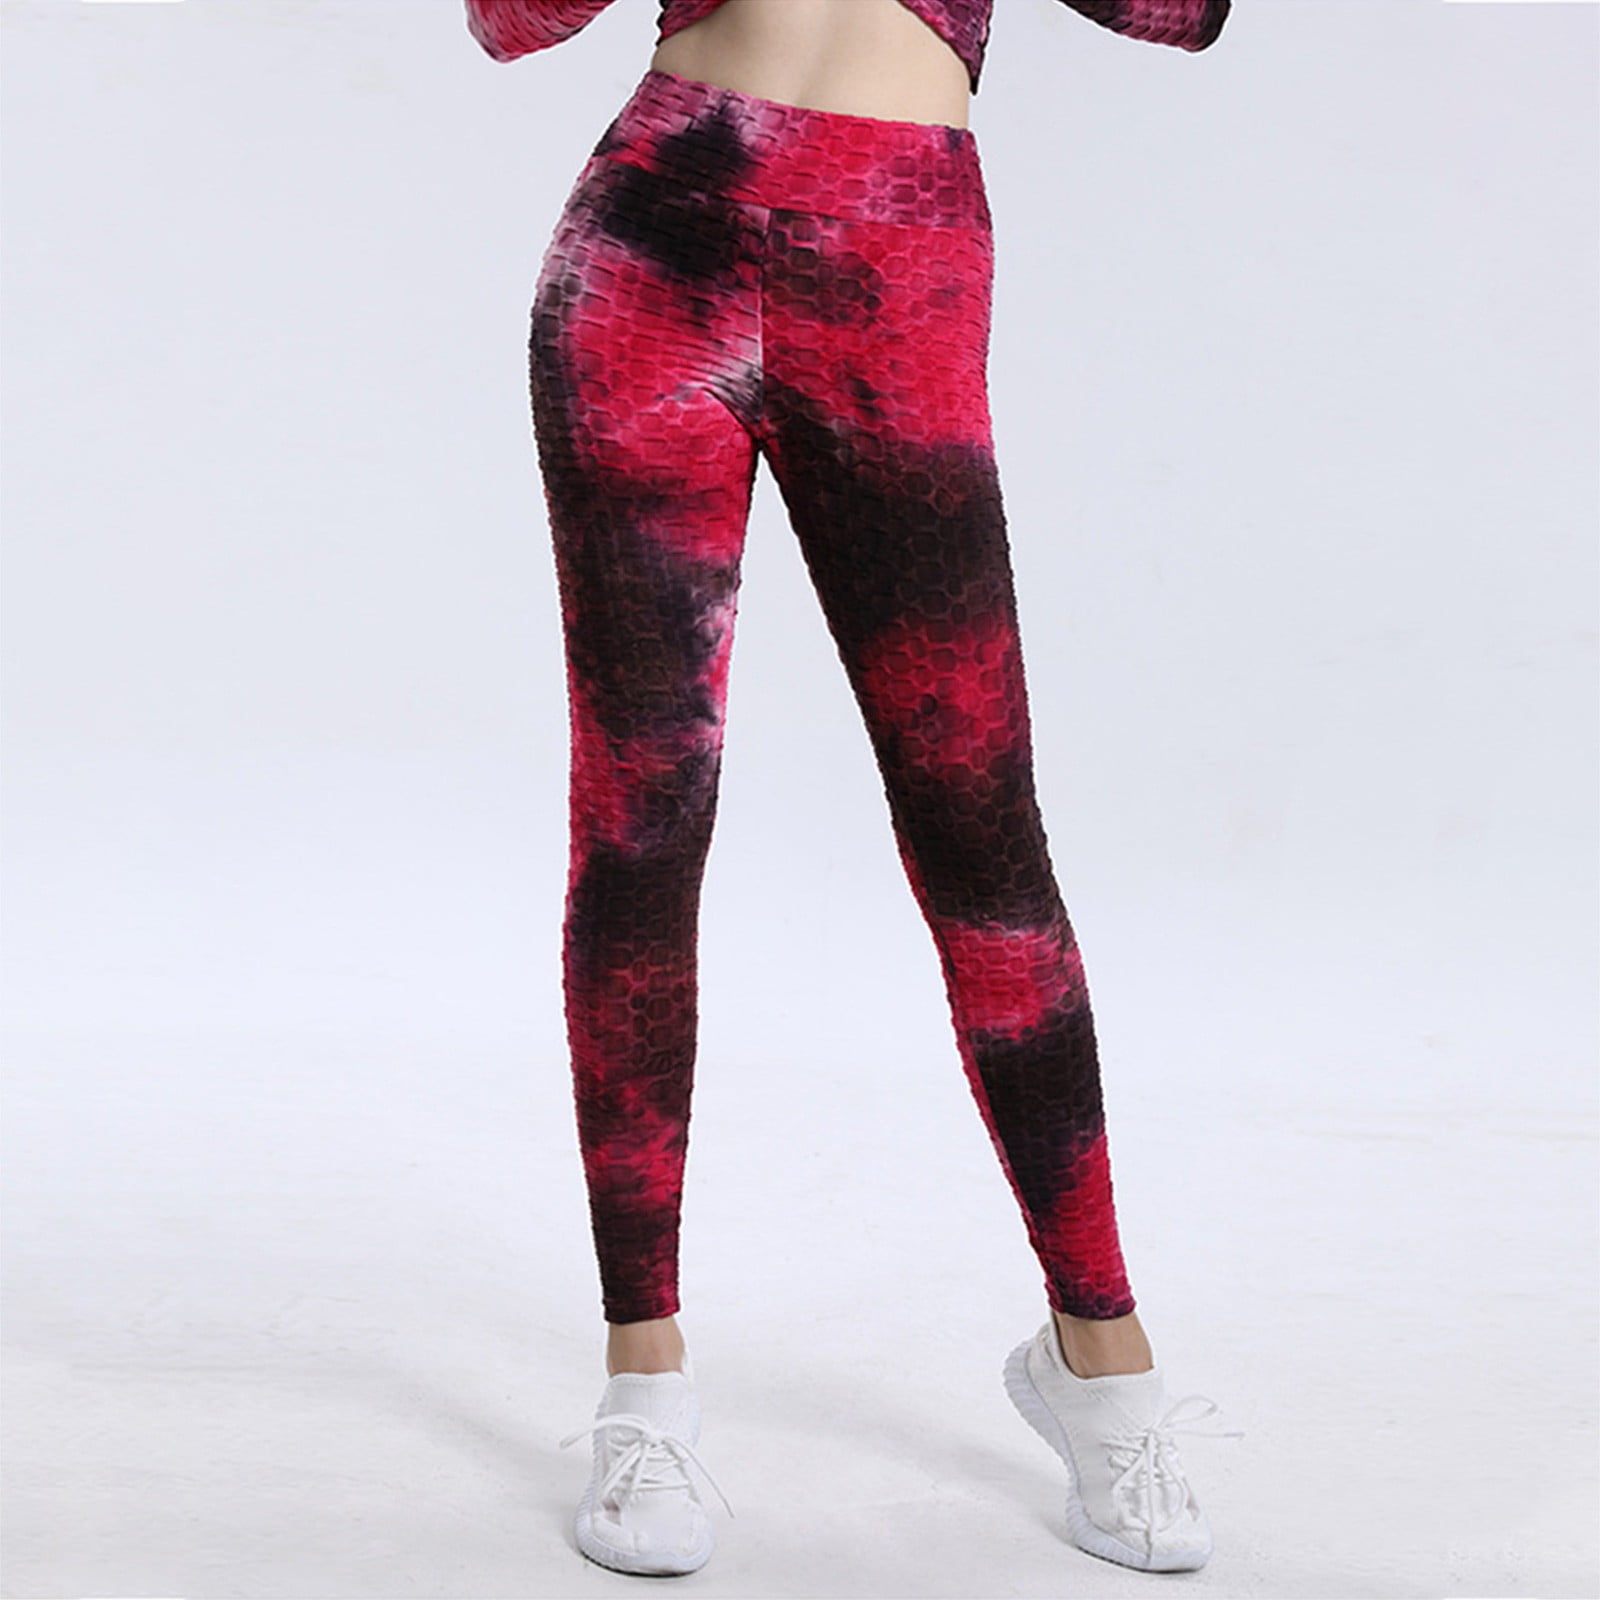 High Waisted Leggings for Women Tummy Control Workout